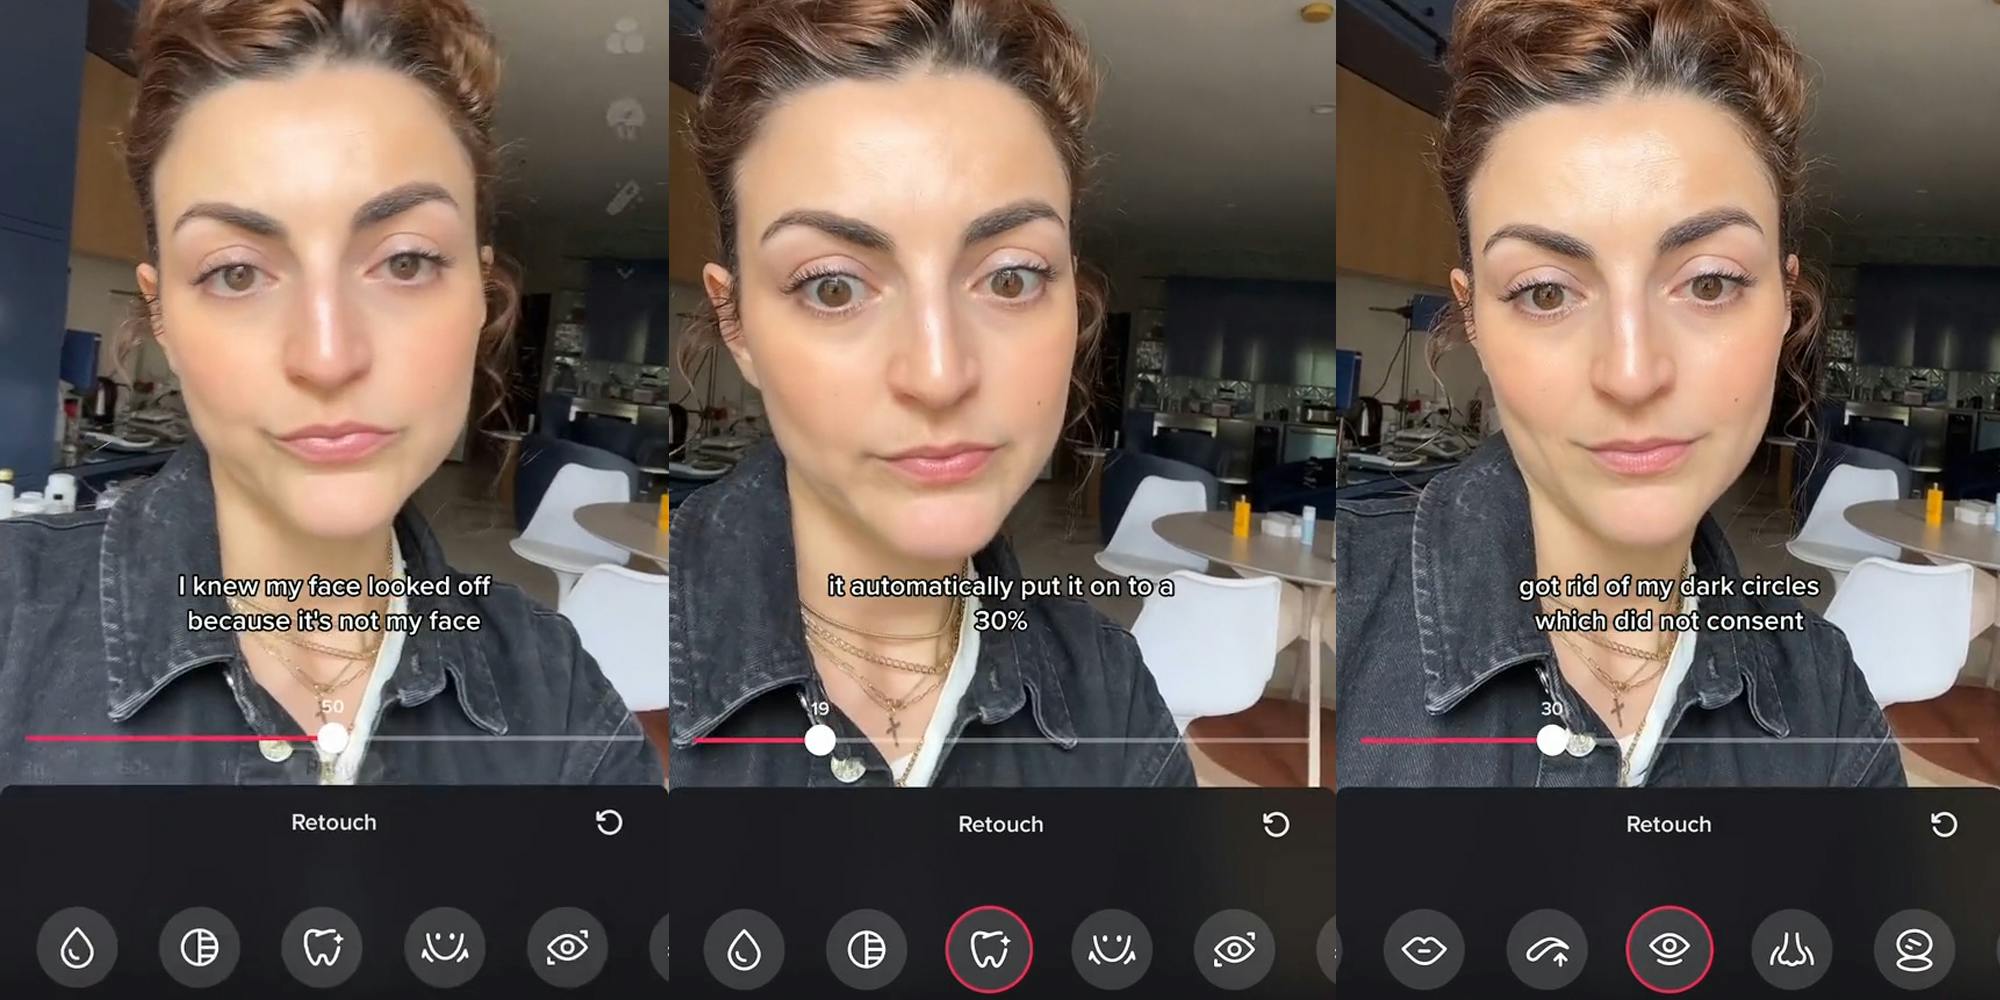 TikTok user in retouch with caption "I knew my face looked off because it's not my face" (l) TikTok user in retouch with caption "it automatically put it on to a 30%" (c) TikTok user in retouch with caption "got rid of my dark circles which did not consent" (r)